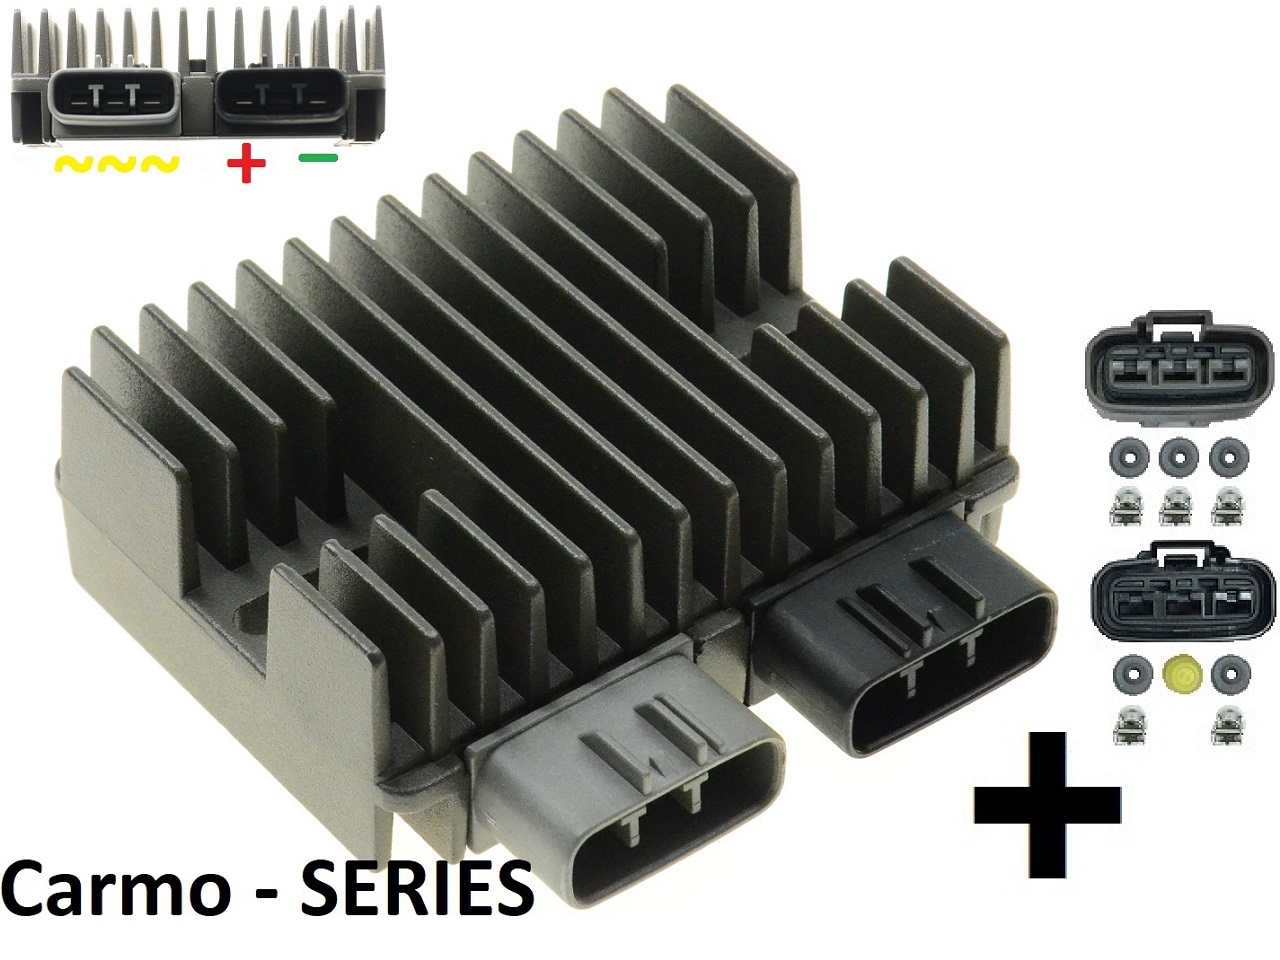 CARR5925-SERIE - MOSFET SERIE SERIES Voltage regulator rectifier (improved SH847) like compu-fire + connectors - Click Image to Close